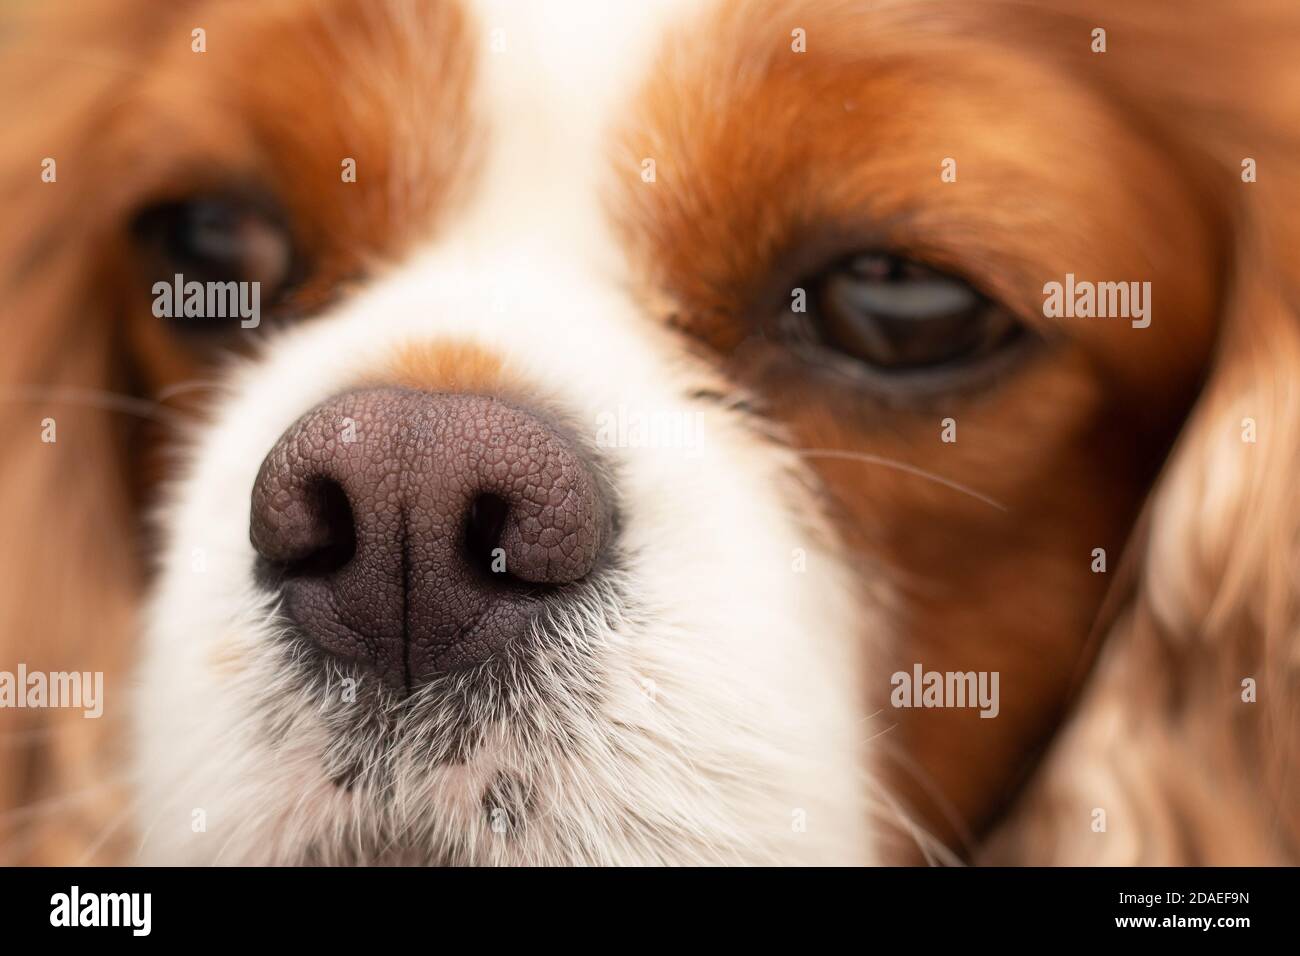 Close up of dark pink dry dog nose. Front view of dog head resting on table. Focus on nose. Relaxed red orange long hair cavalier king charles spaniel Stock Photo